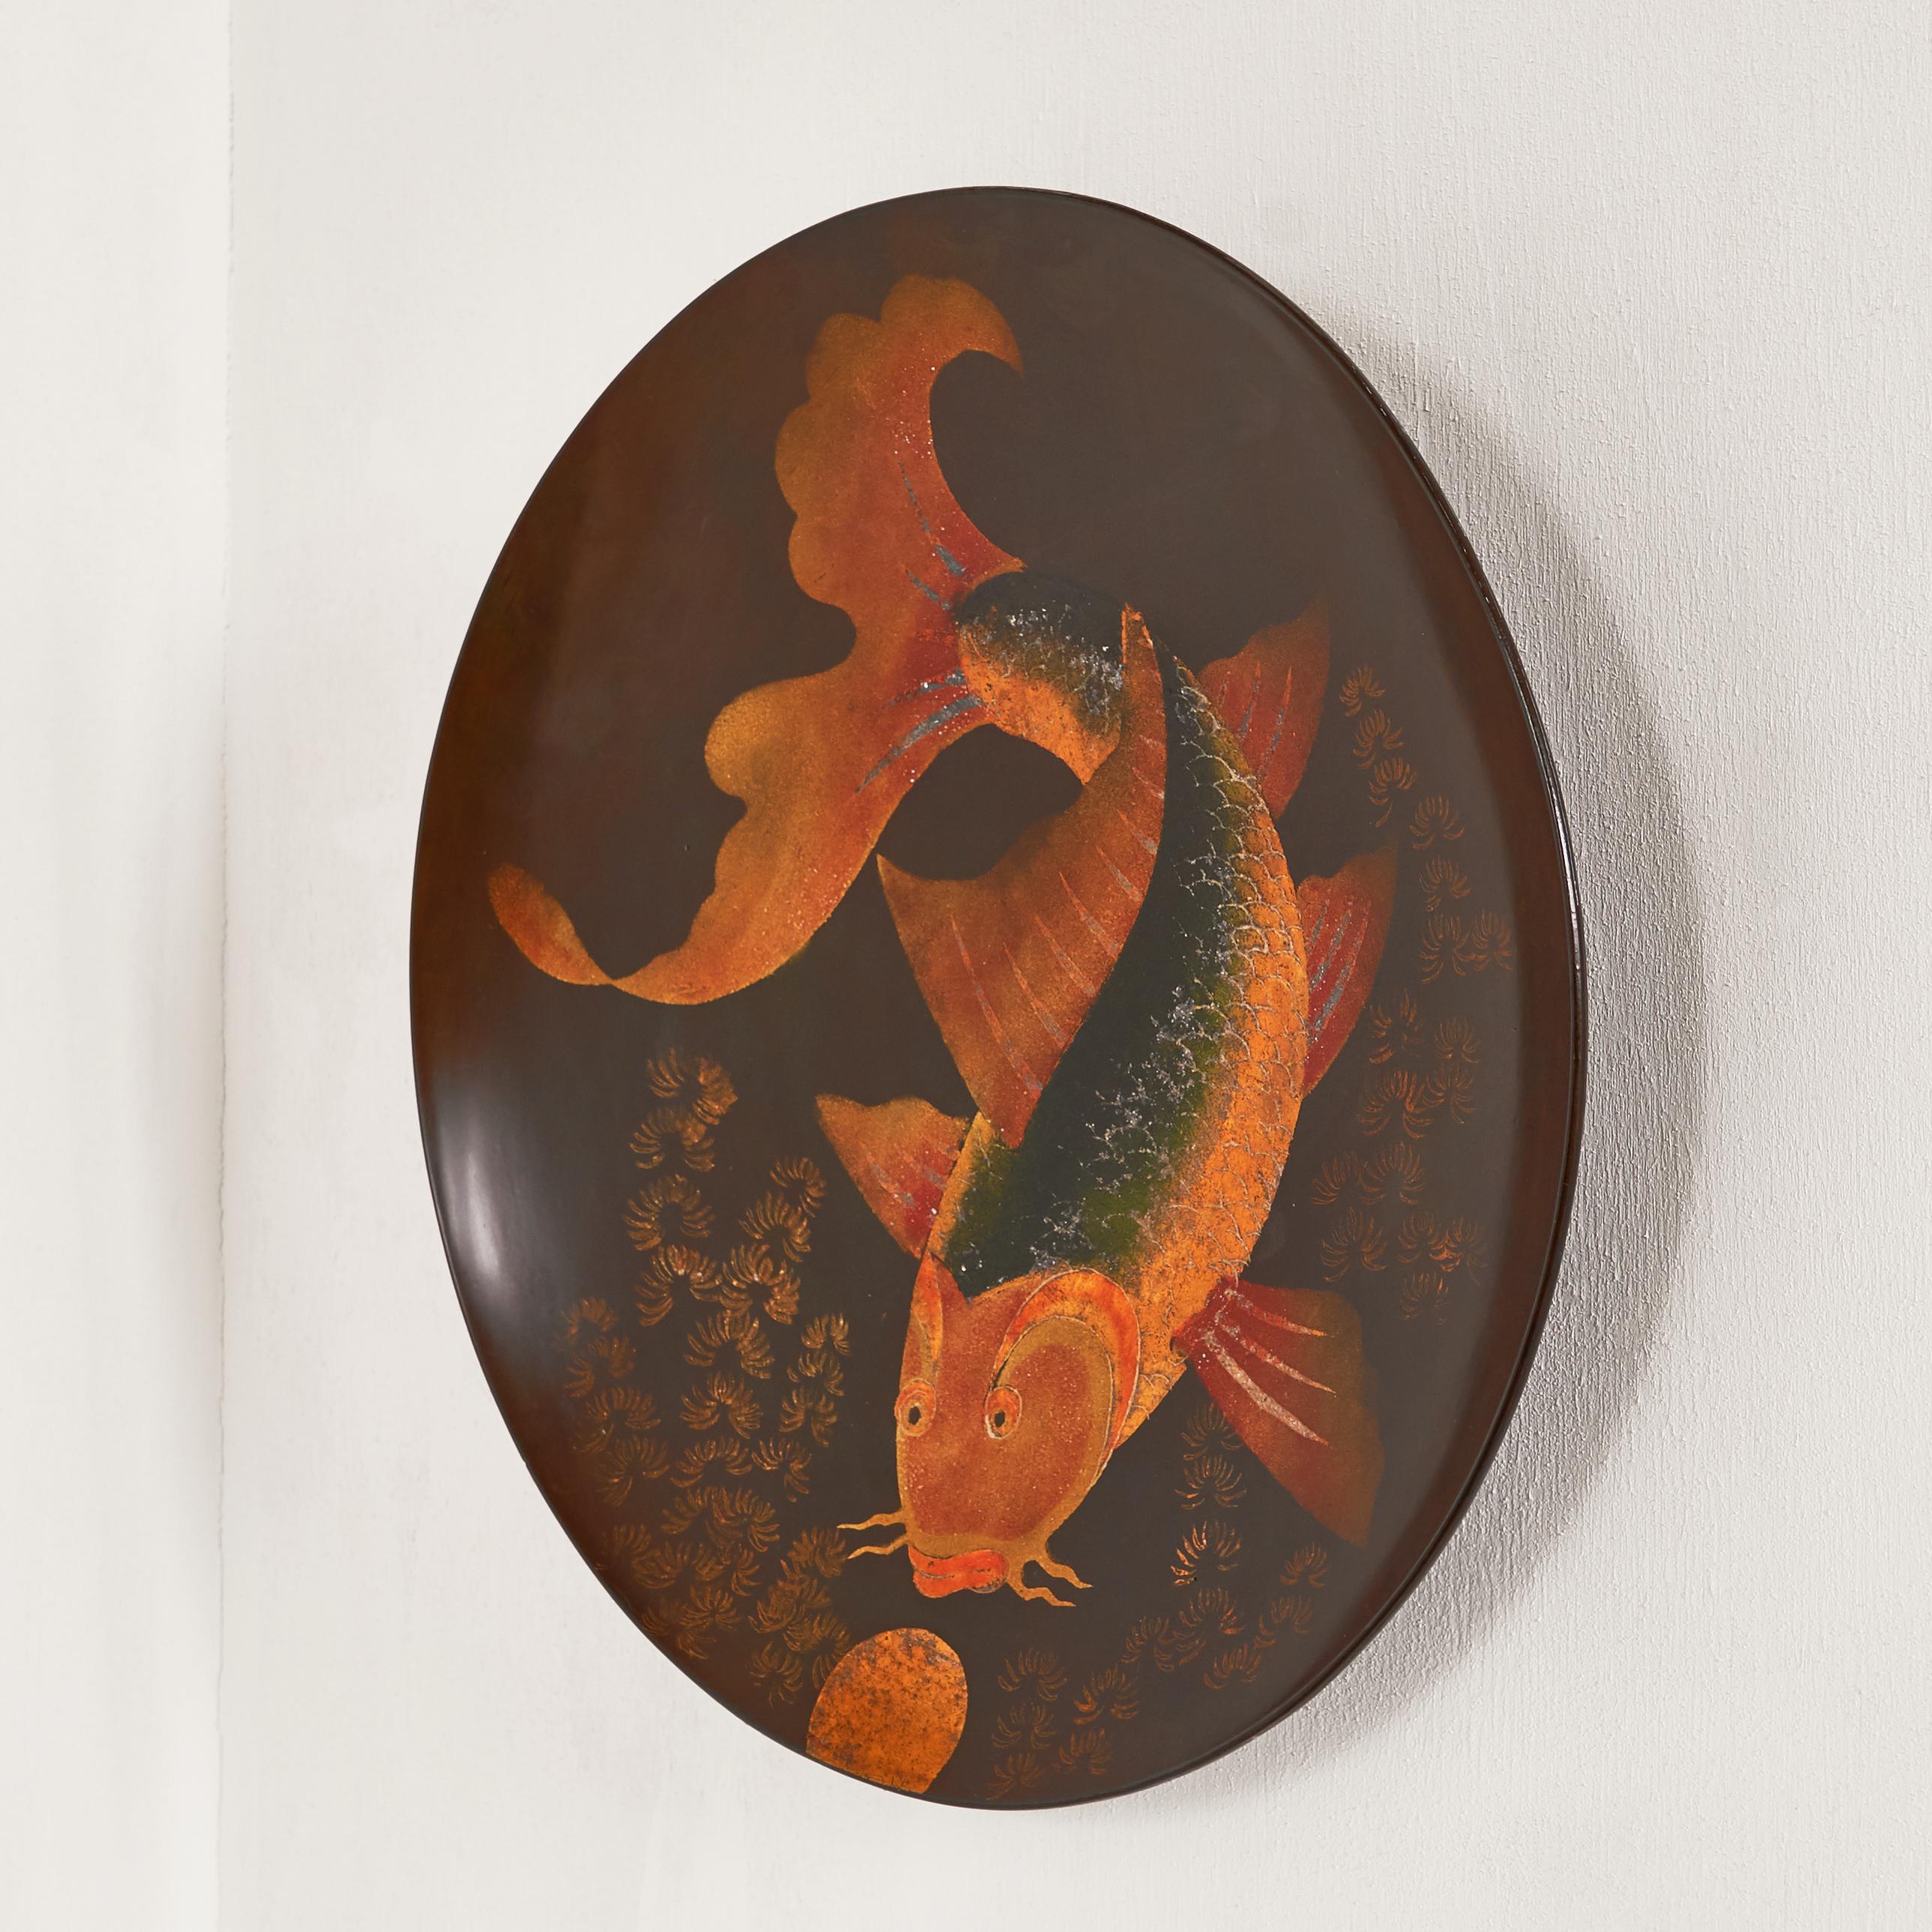 Beautiful Japanese or Japanese influenced plate with a stylish hand painted fish decor. The beautiful colors and shades make this bowl a very decorative piece. The depicted image of a Japanese fish is very delicate and masterfully done in great warm